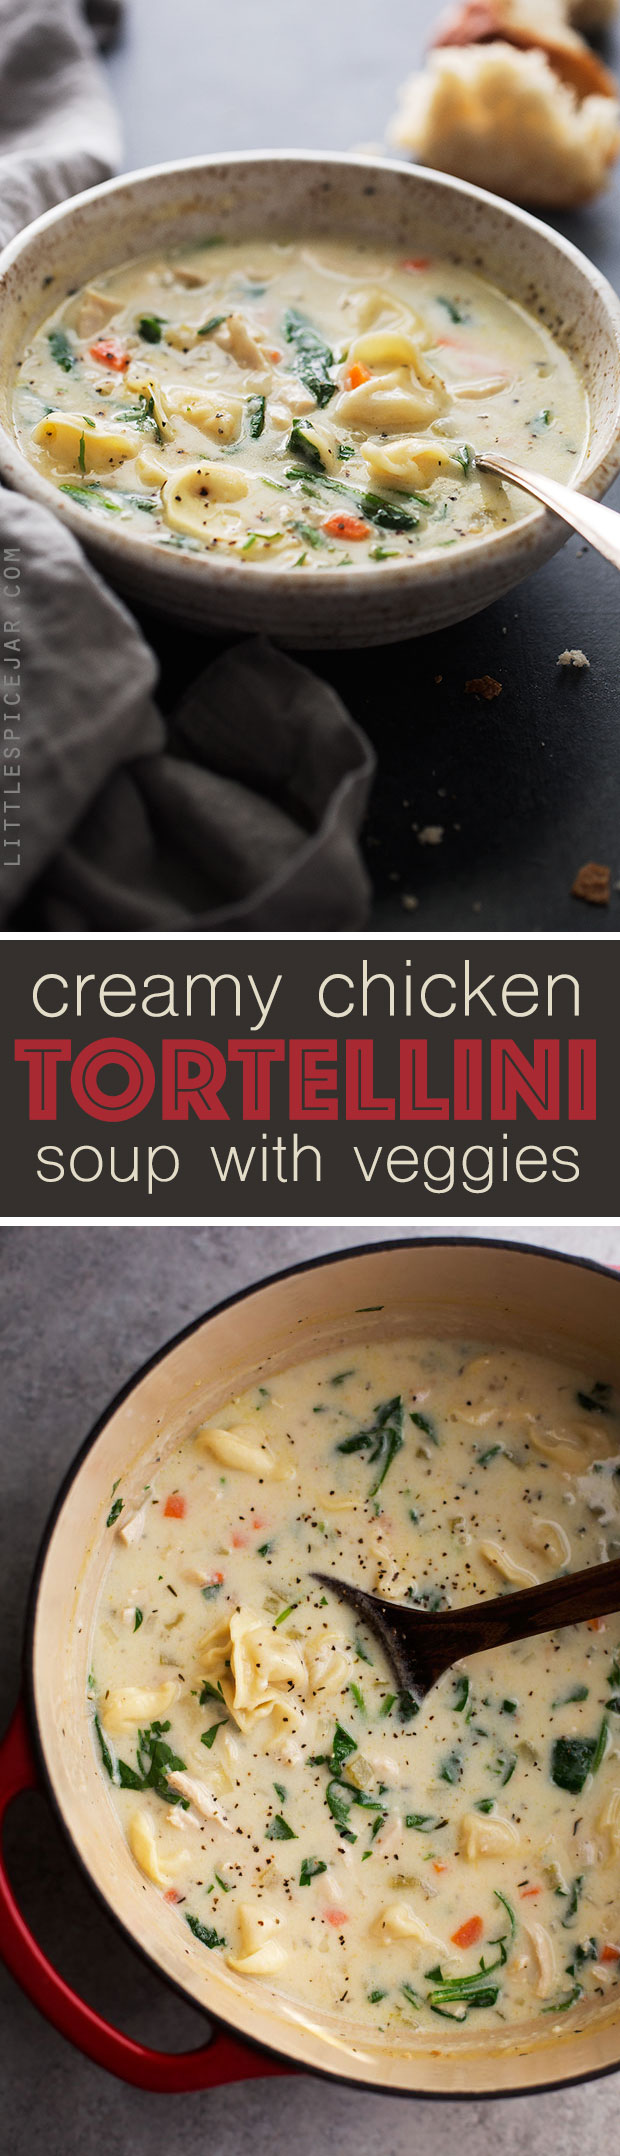 Creamy Chicken Tortellini Soup - a creamy chicken soup with tons of carrots, baby spinach, and cheesy tortellini. So perfect for fall! #chickennoodlesoup #chickensoup #chickentortellinisoup | Littlespicejar.com